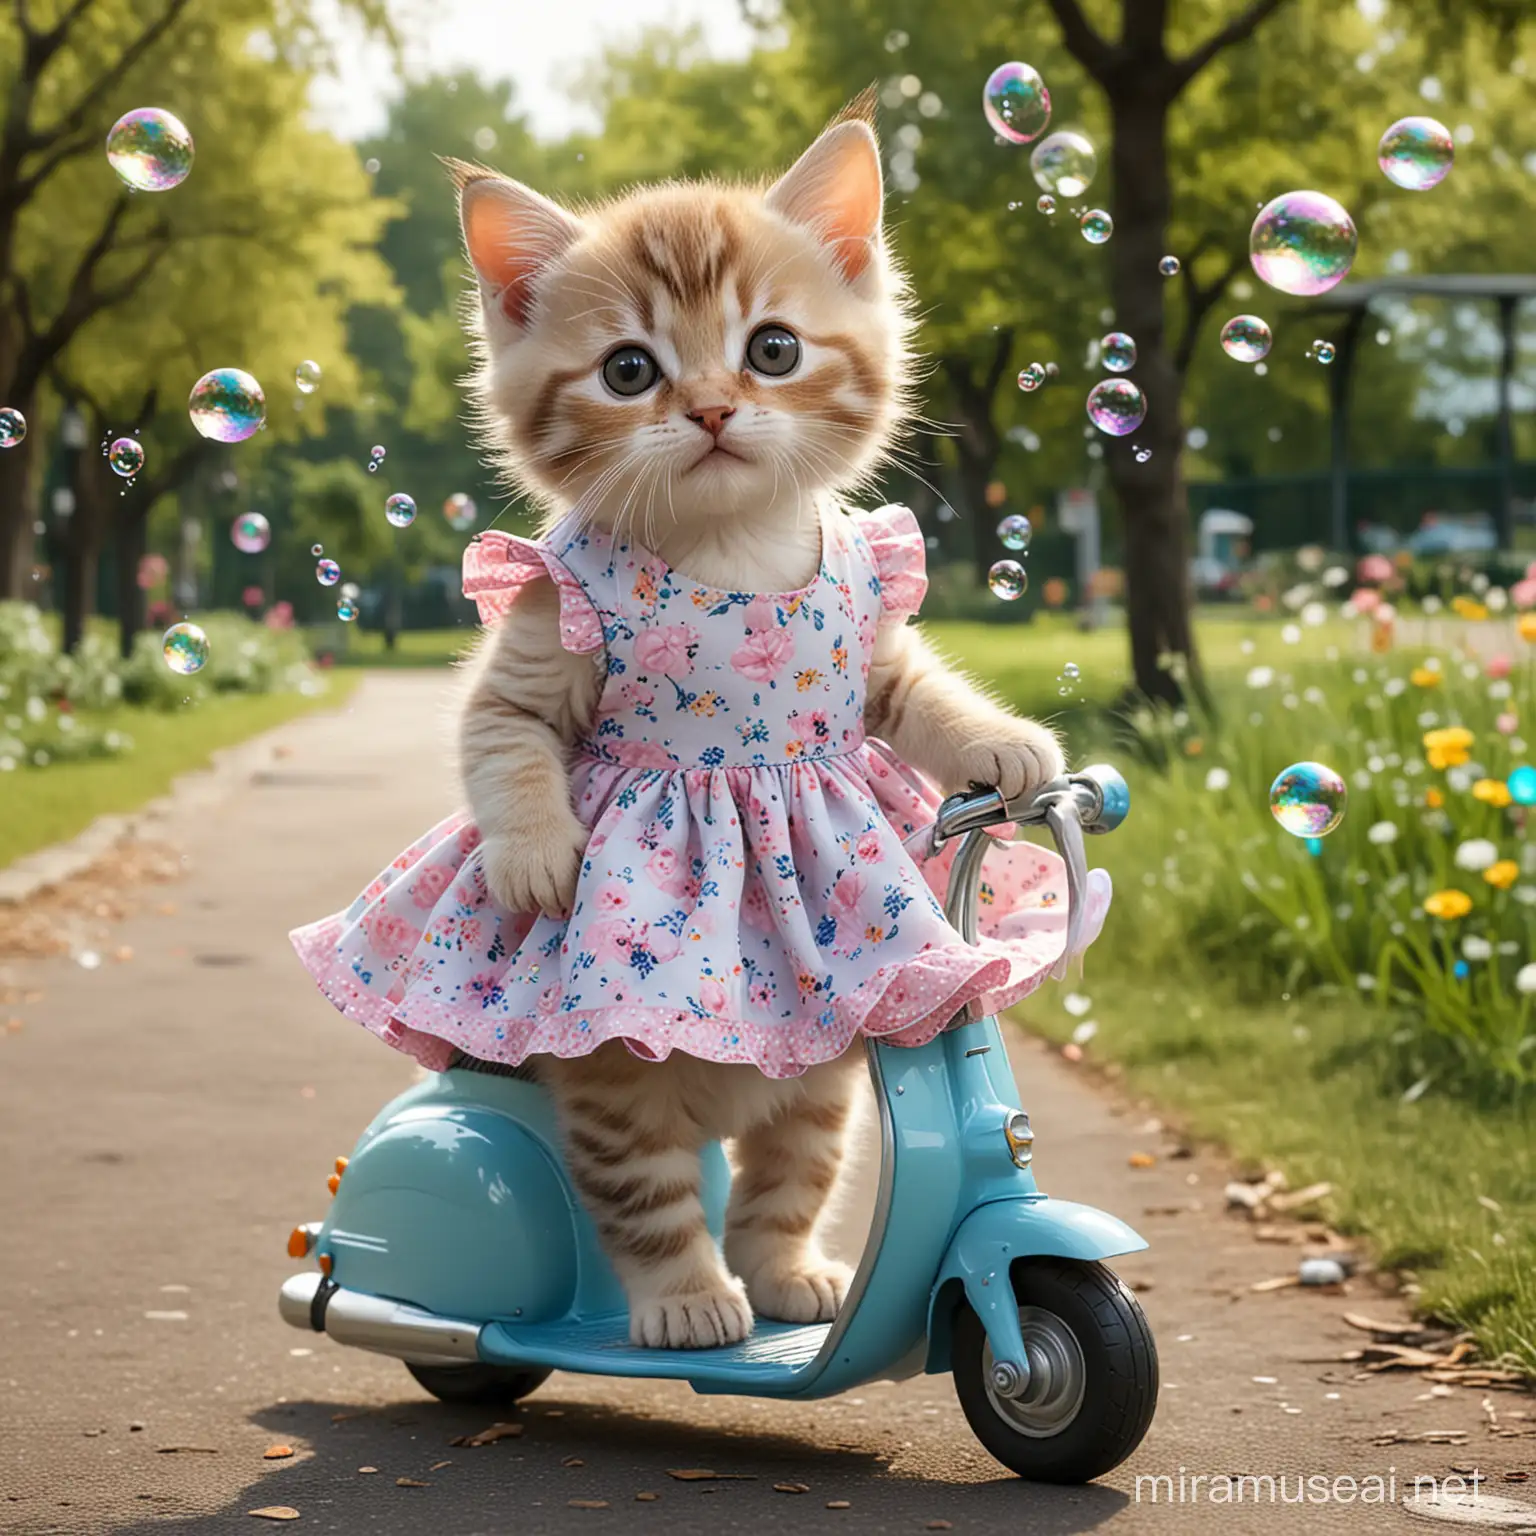 a photo of a realistic kitten that wears a cute dress is riding a scooter and looking at bubbles in a park.